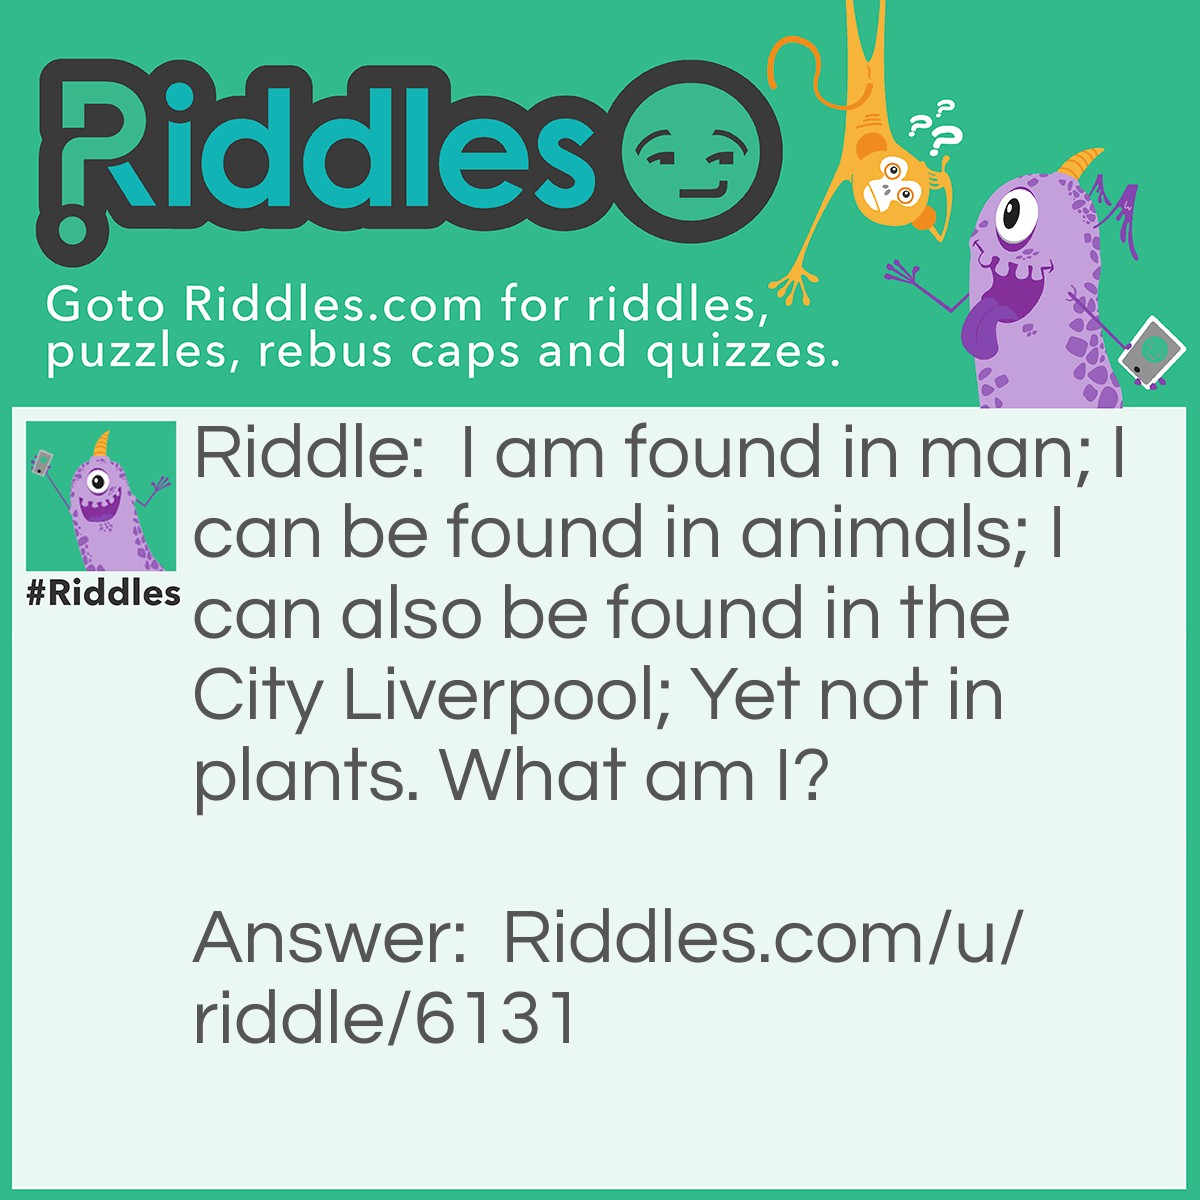 Riddle: I am found in man; I can be found in animals; I can also be found in the City Liverpool; Yet not in plants. What am I? Answer: Liver.